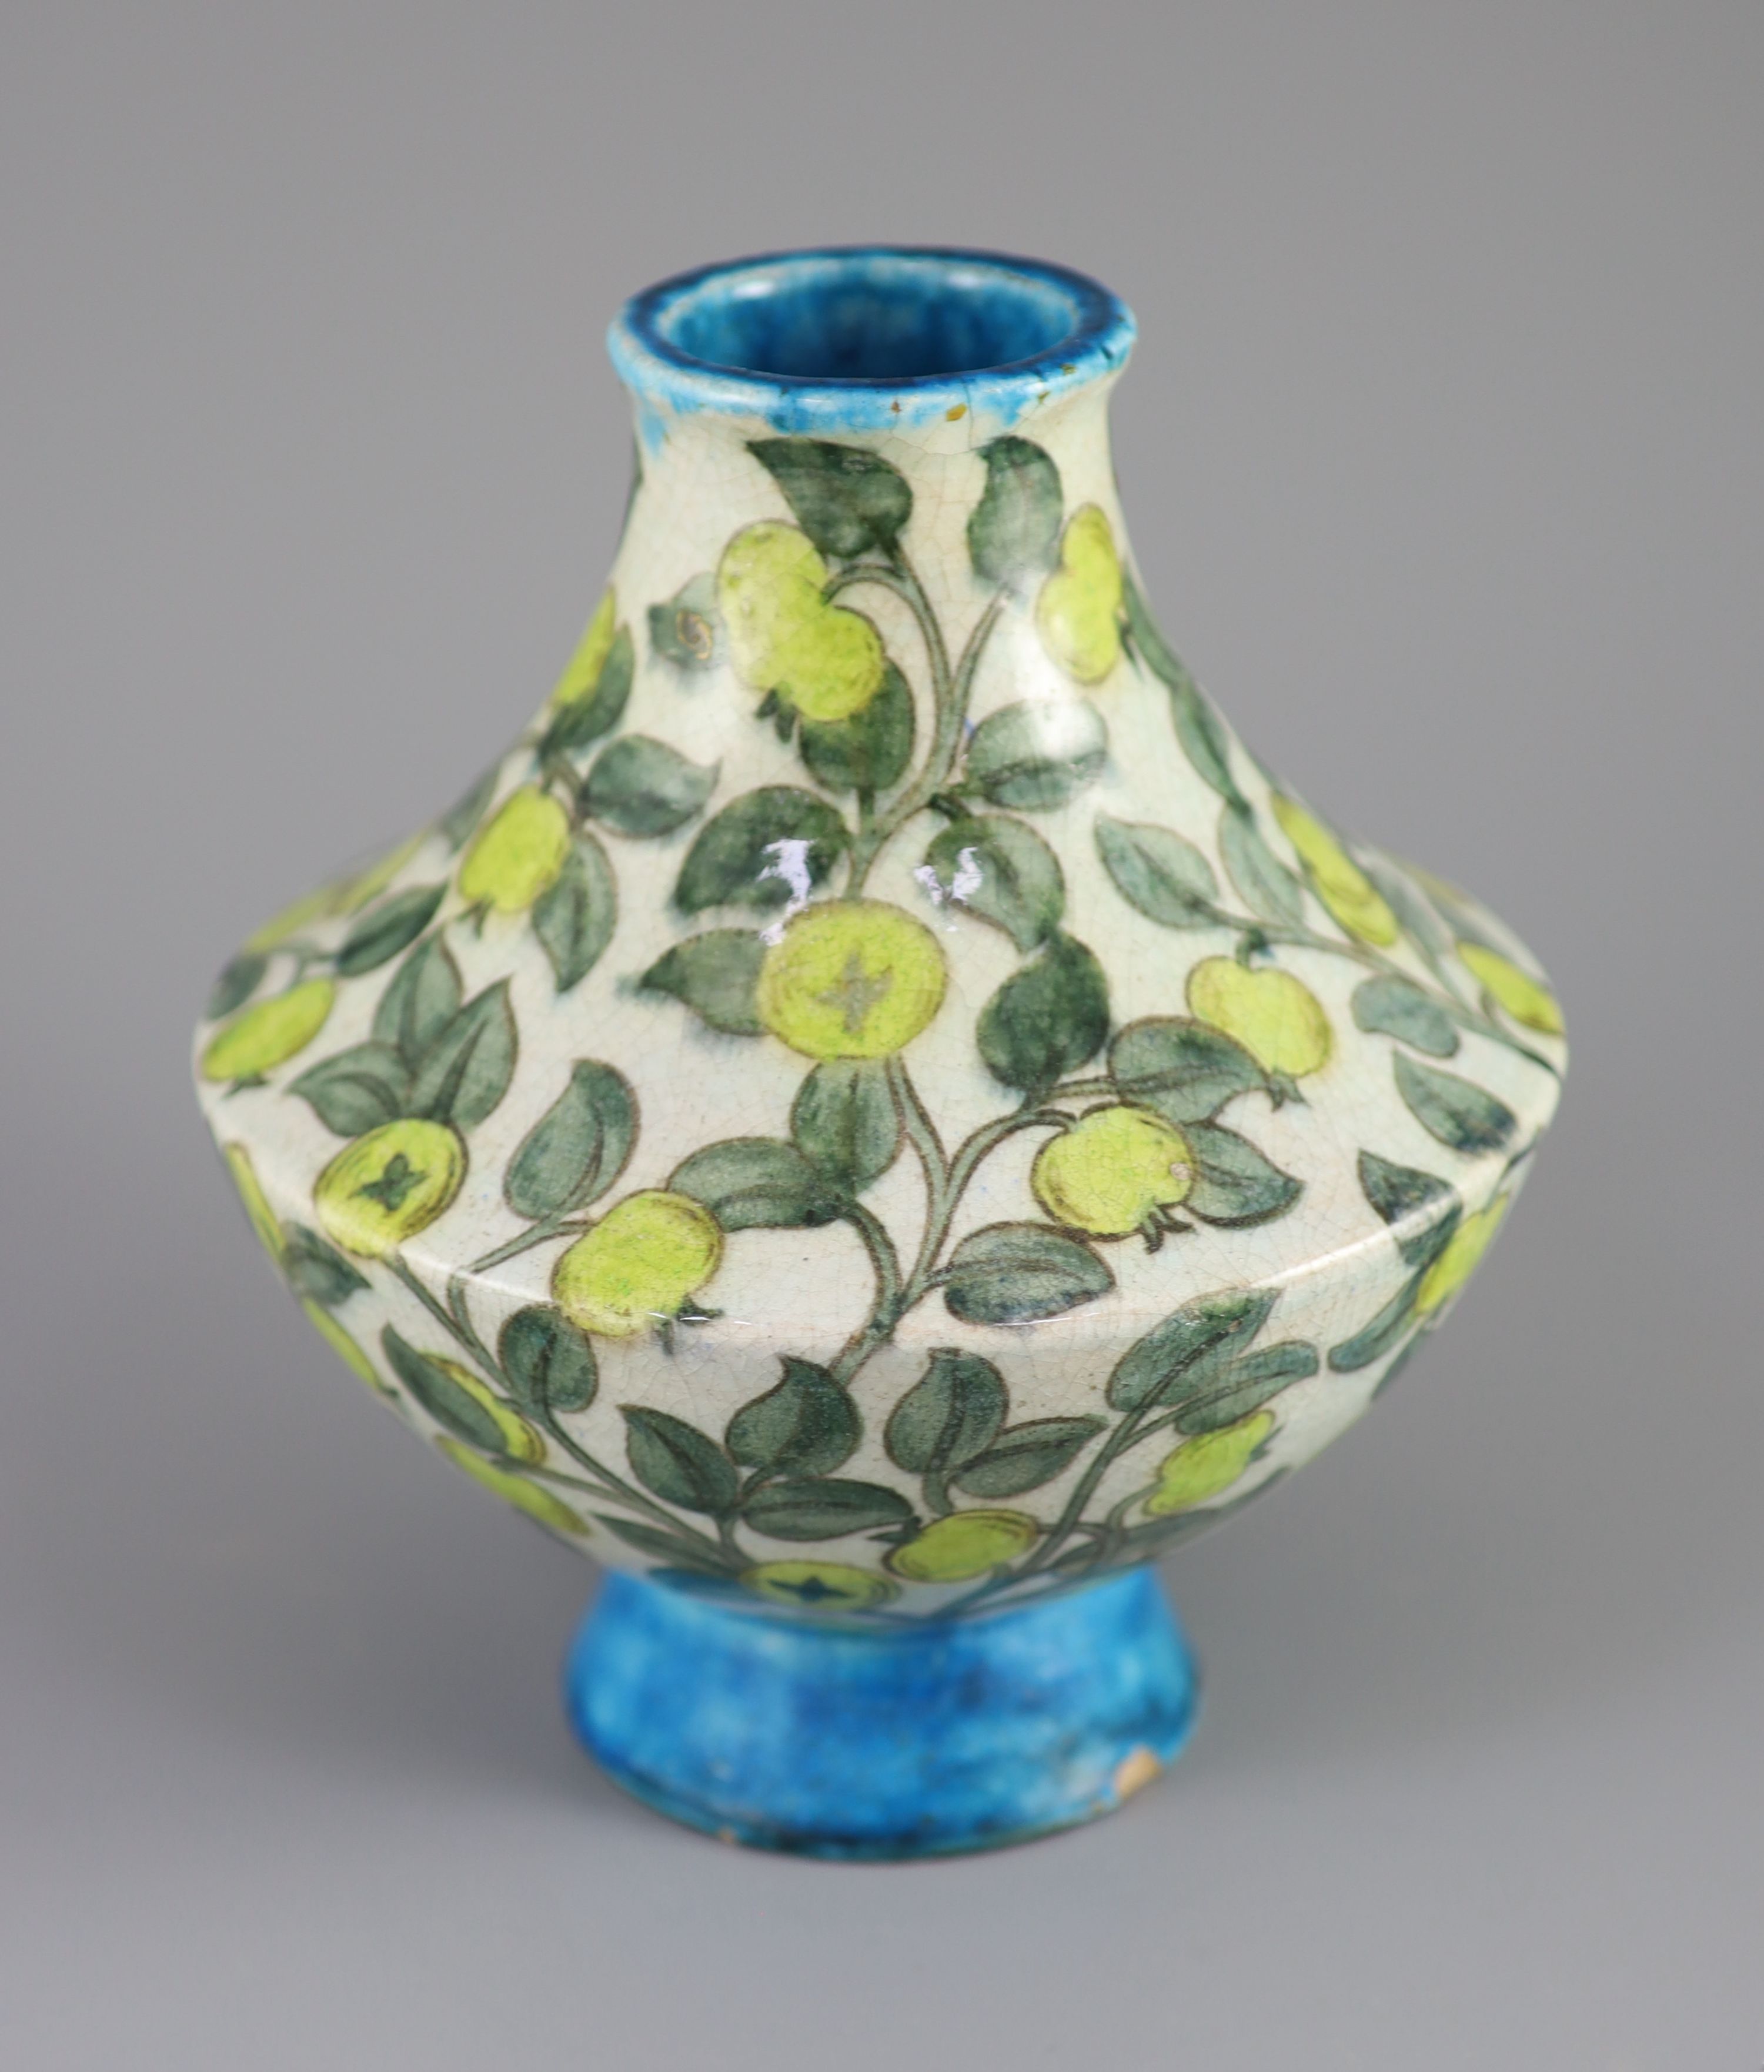 A William de Morgan tin glazed earthenware vase, early Fulham period, c.1890, 20cm high, small foot chips